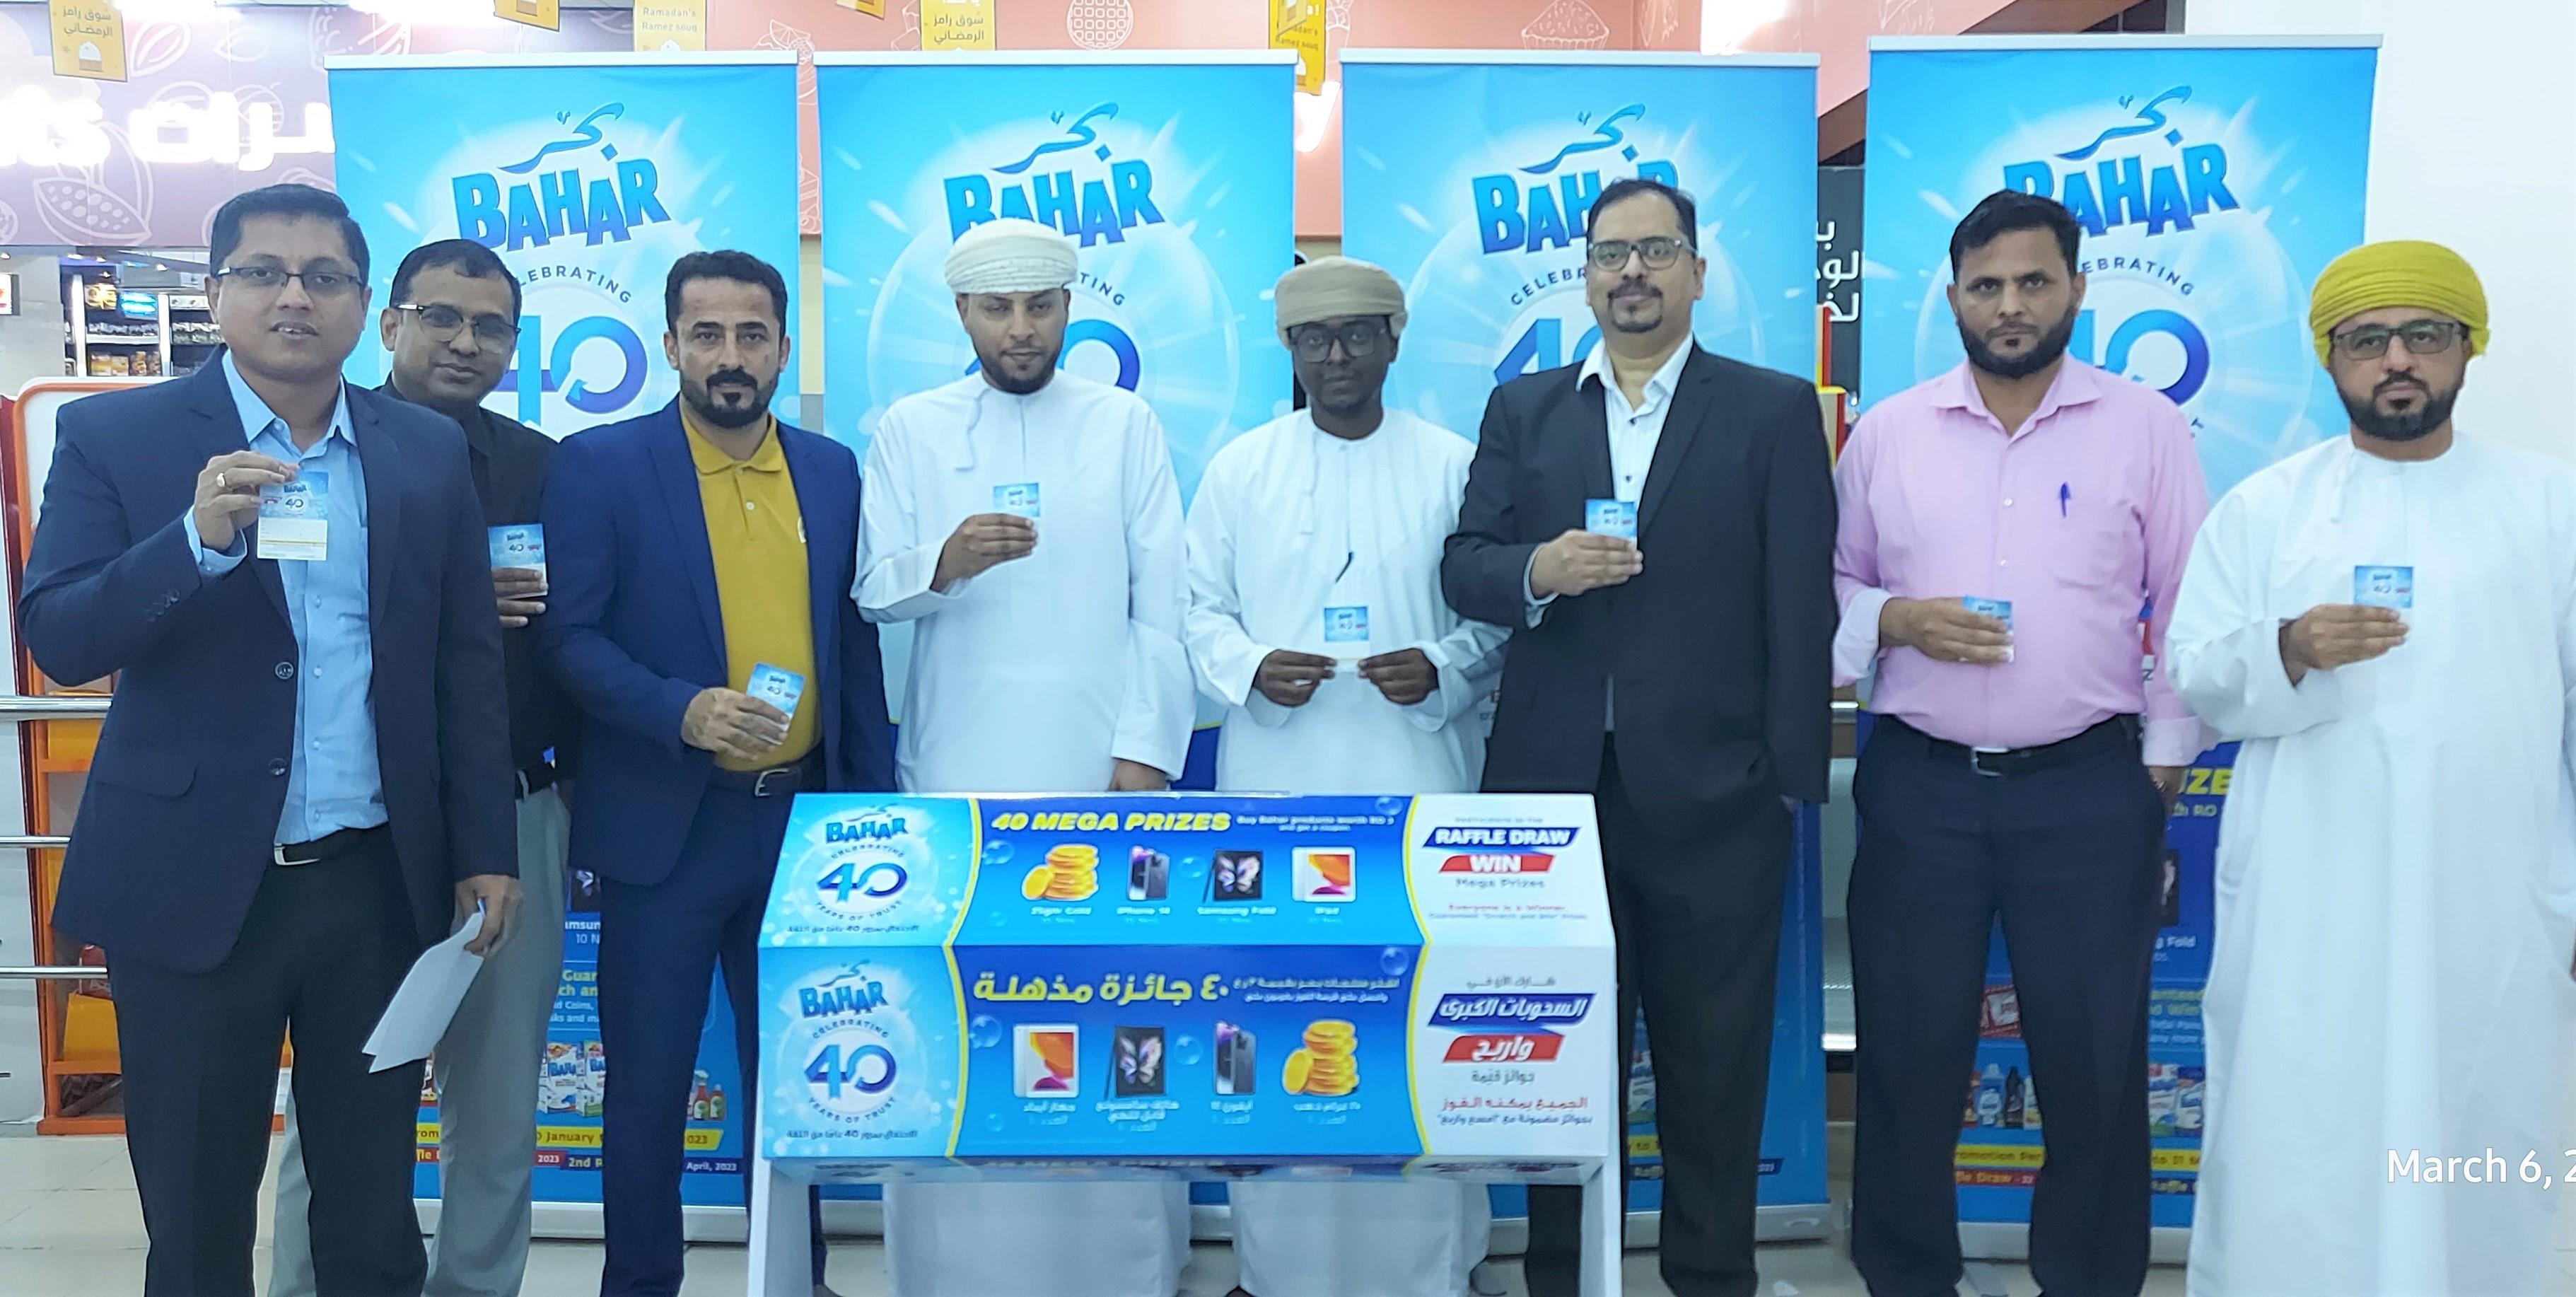 Bahar announces winners of the 1st raffle draw of the 40th anniversary promotion. logo